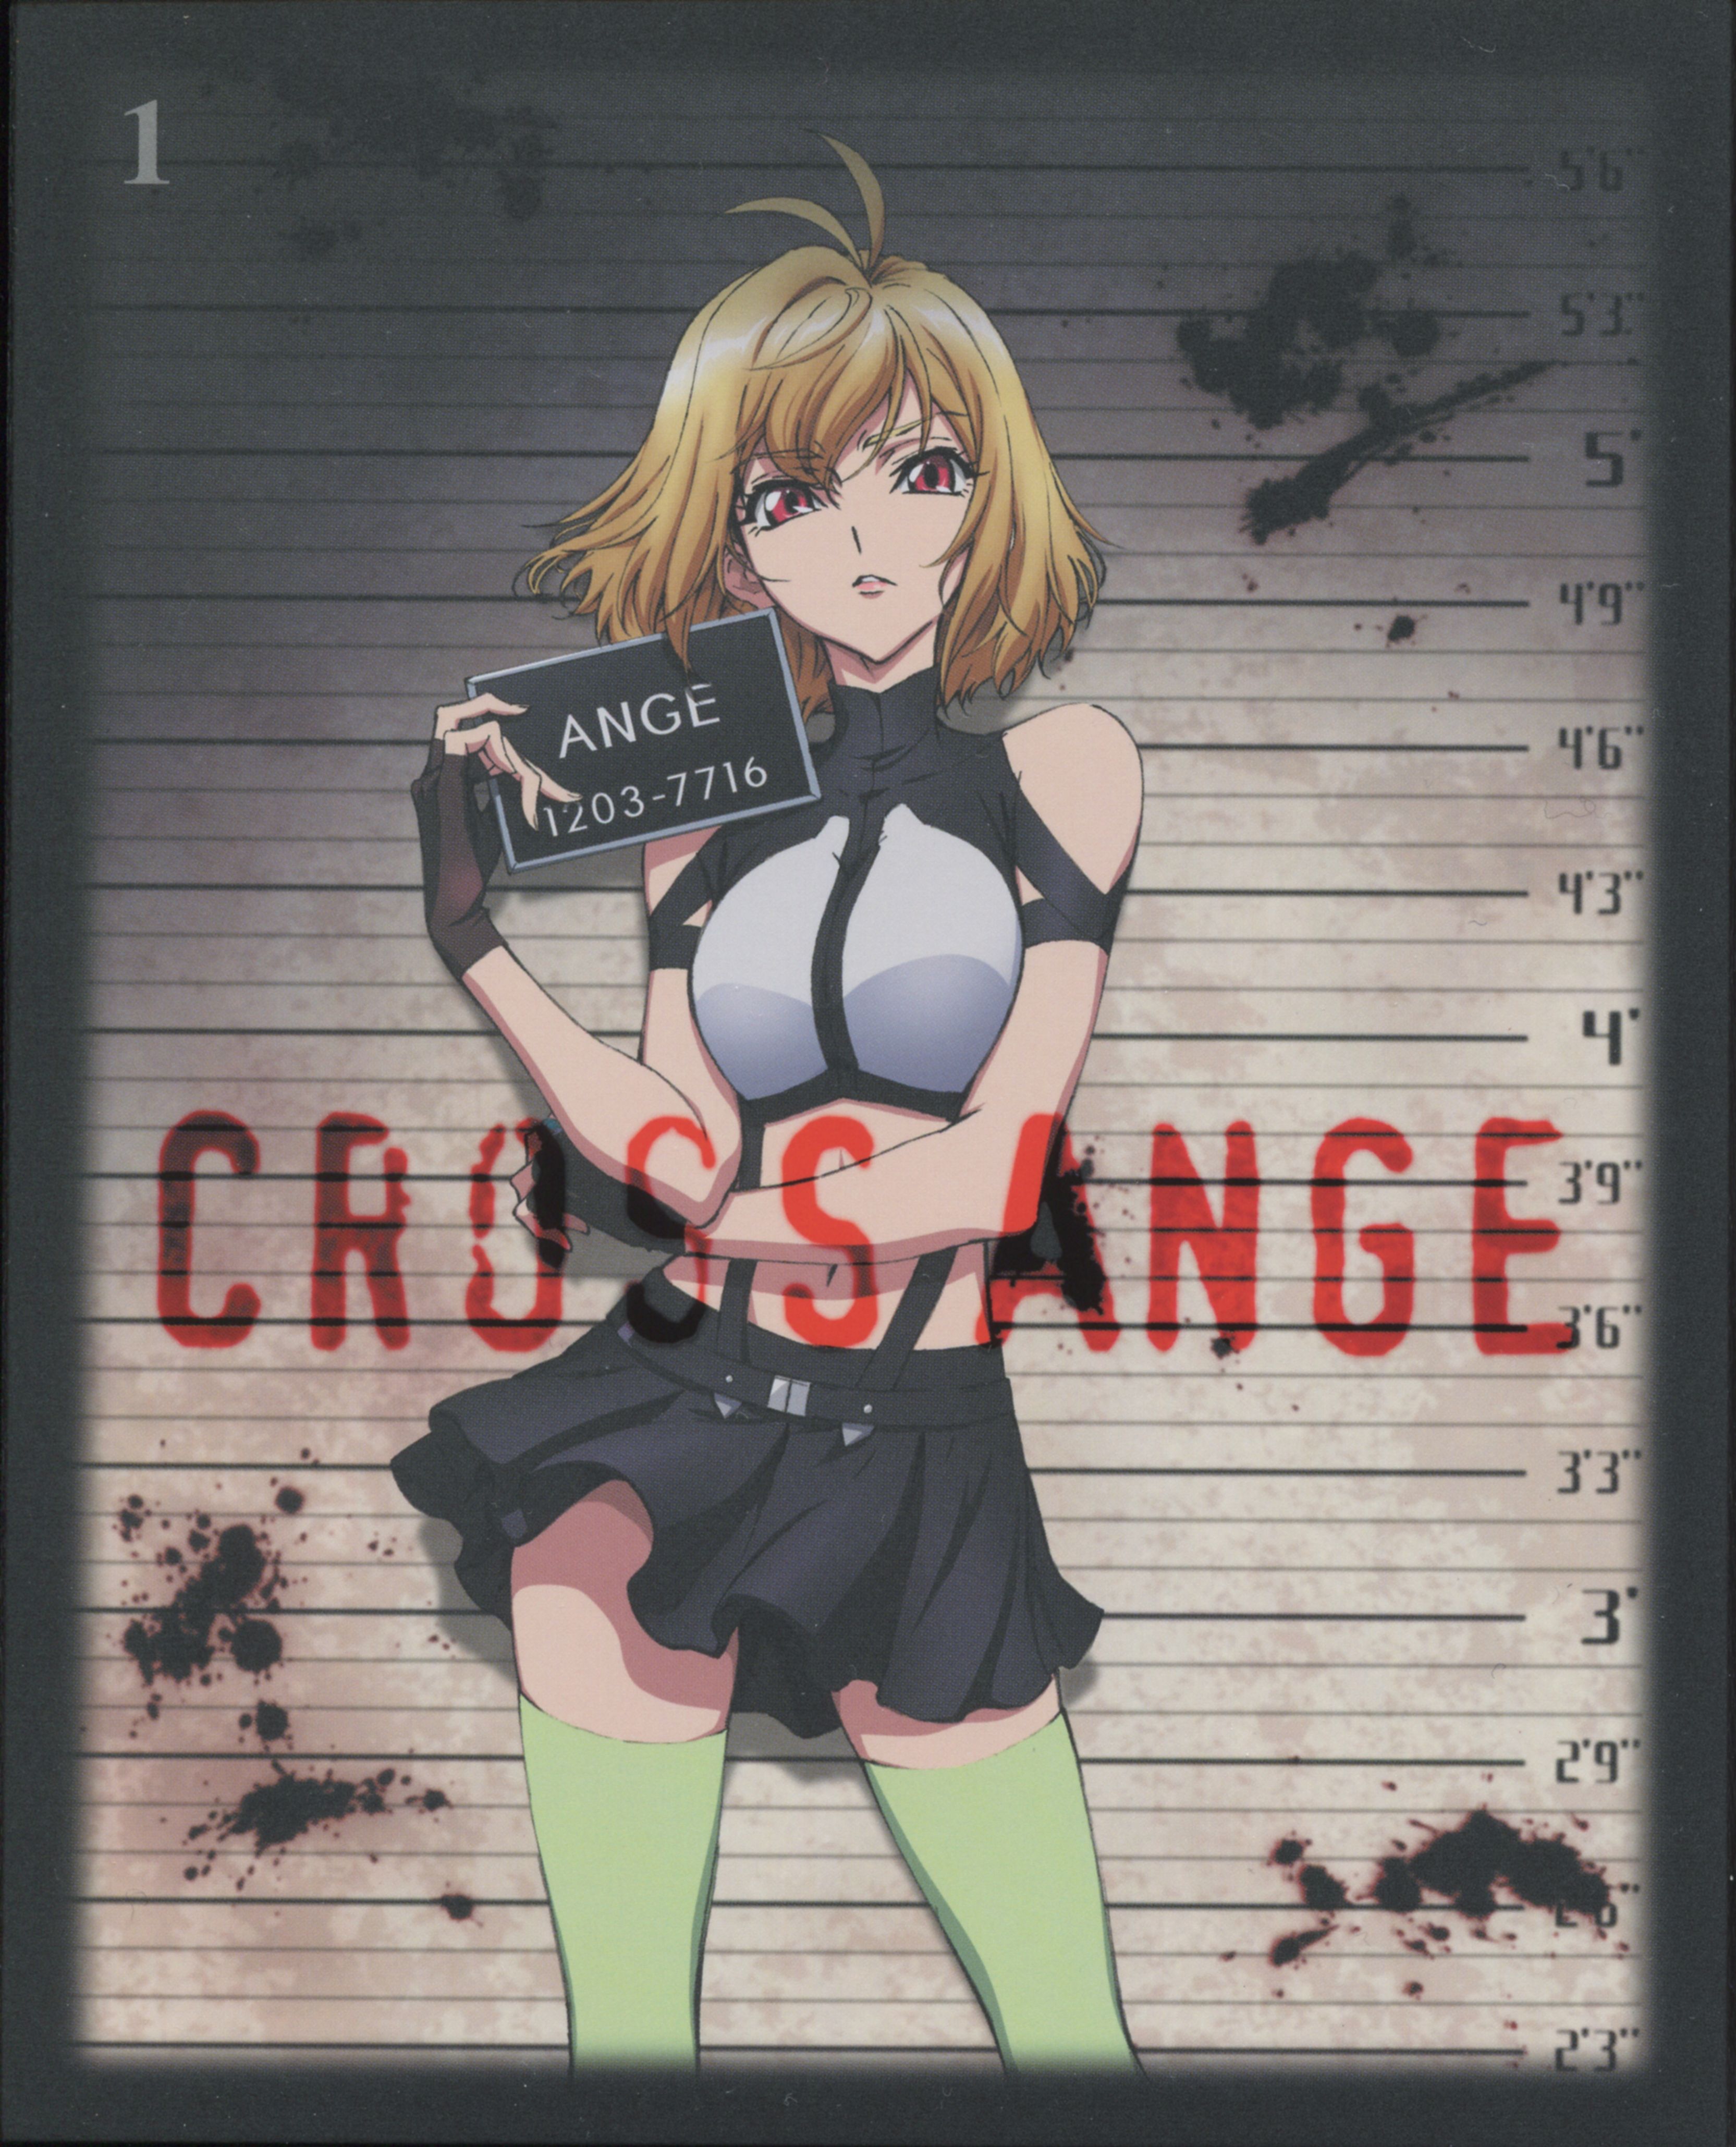 Cross Ange and Scan Gallery